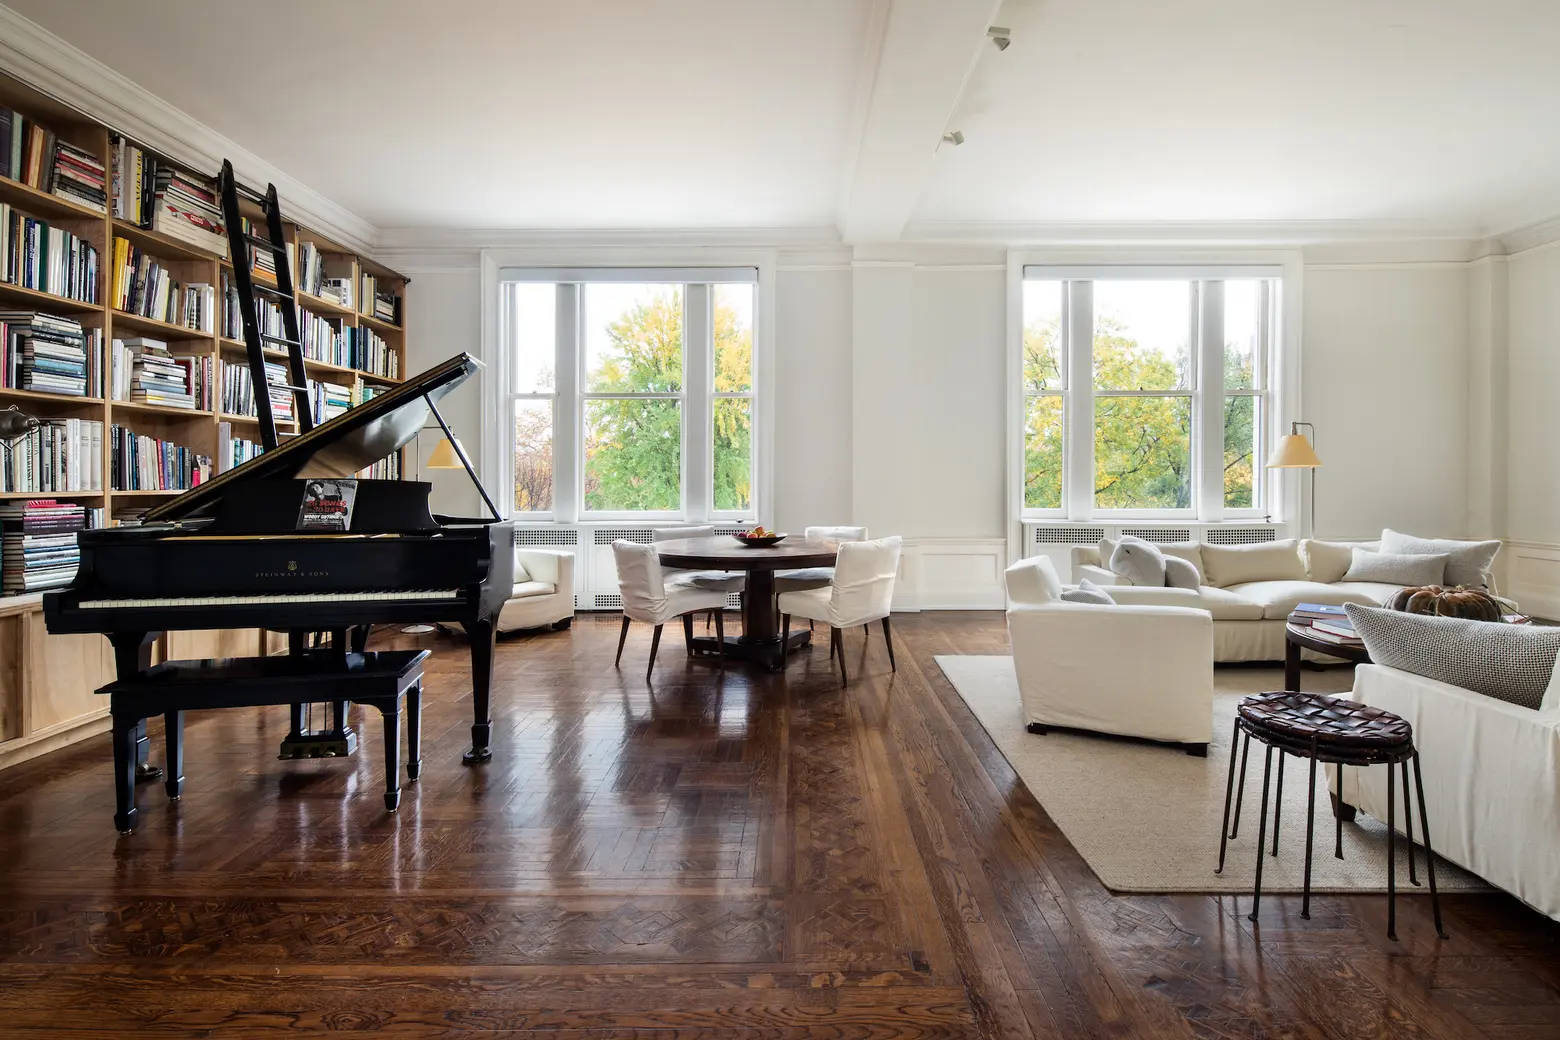 Annie Leibovitz sells UWS home for $2M over asking price